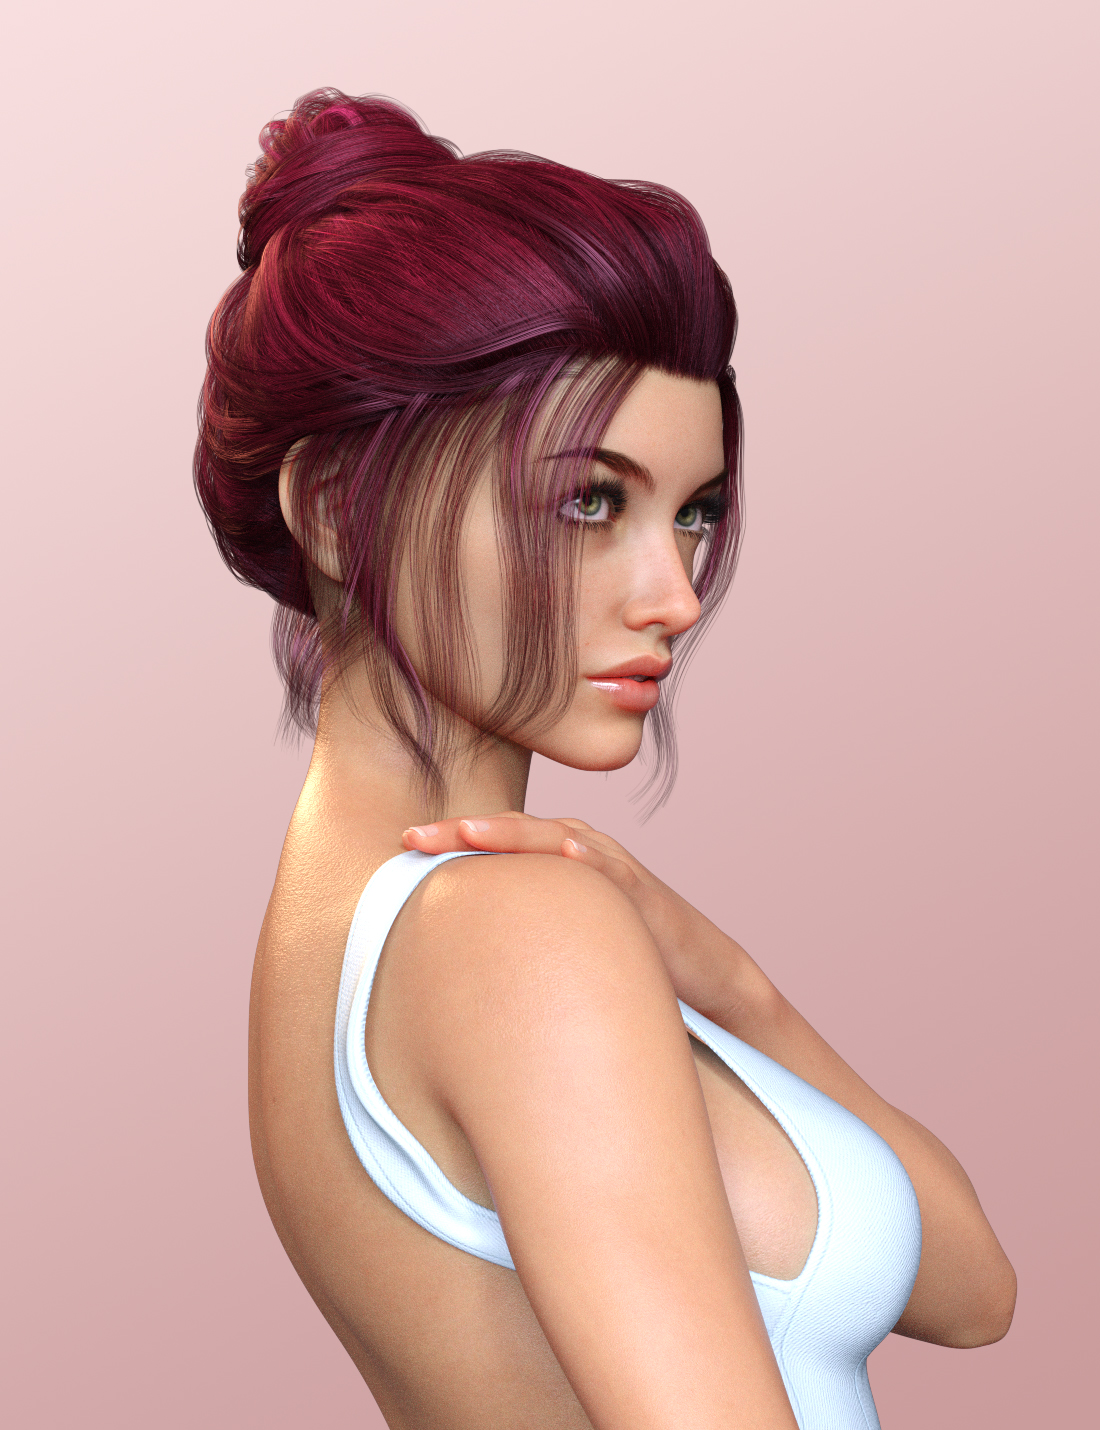 Magical Arts Updo Hairstyle for Genesis 8.1 Females